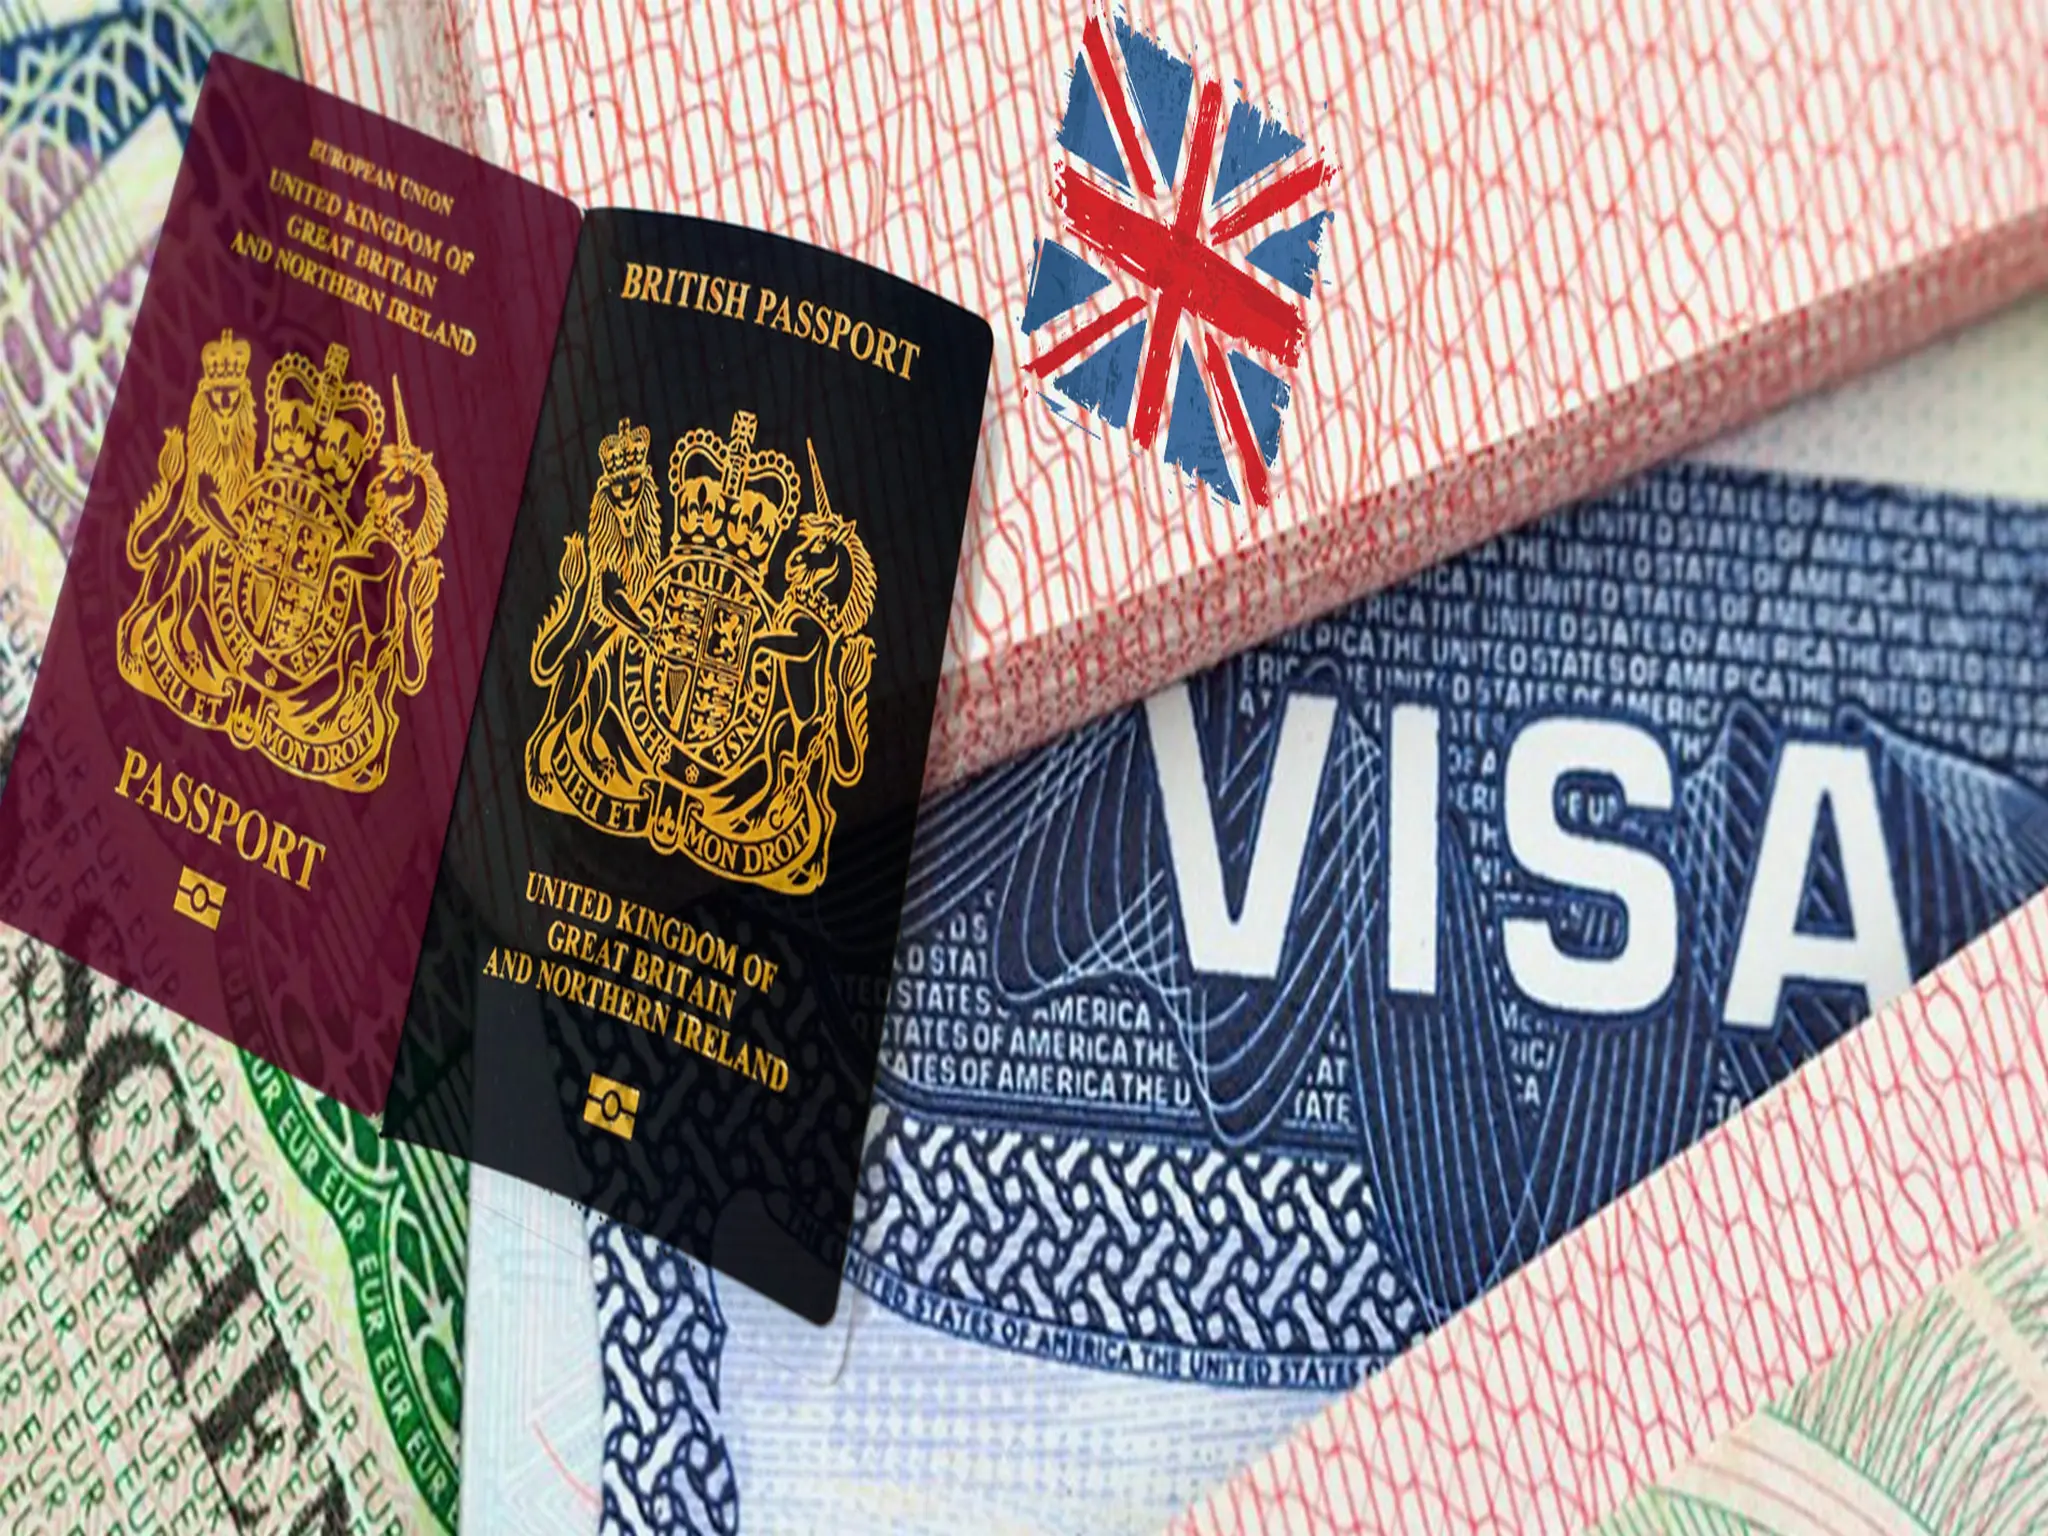 Britain begins exemption these countries from visas starting February 22